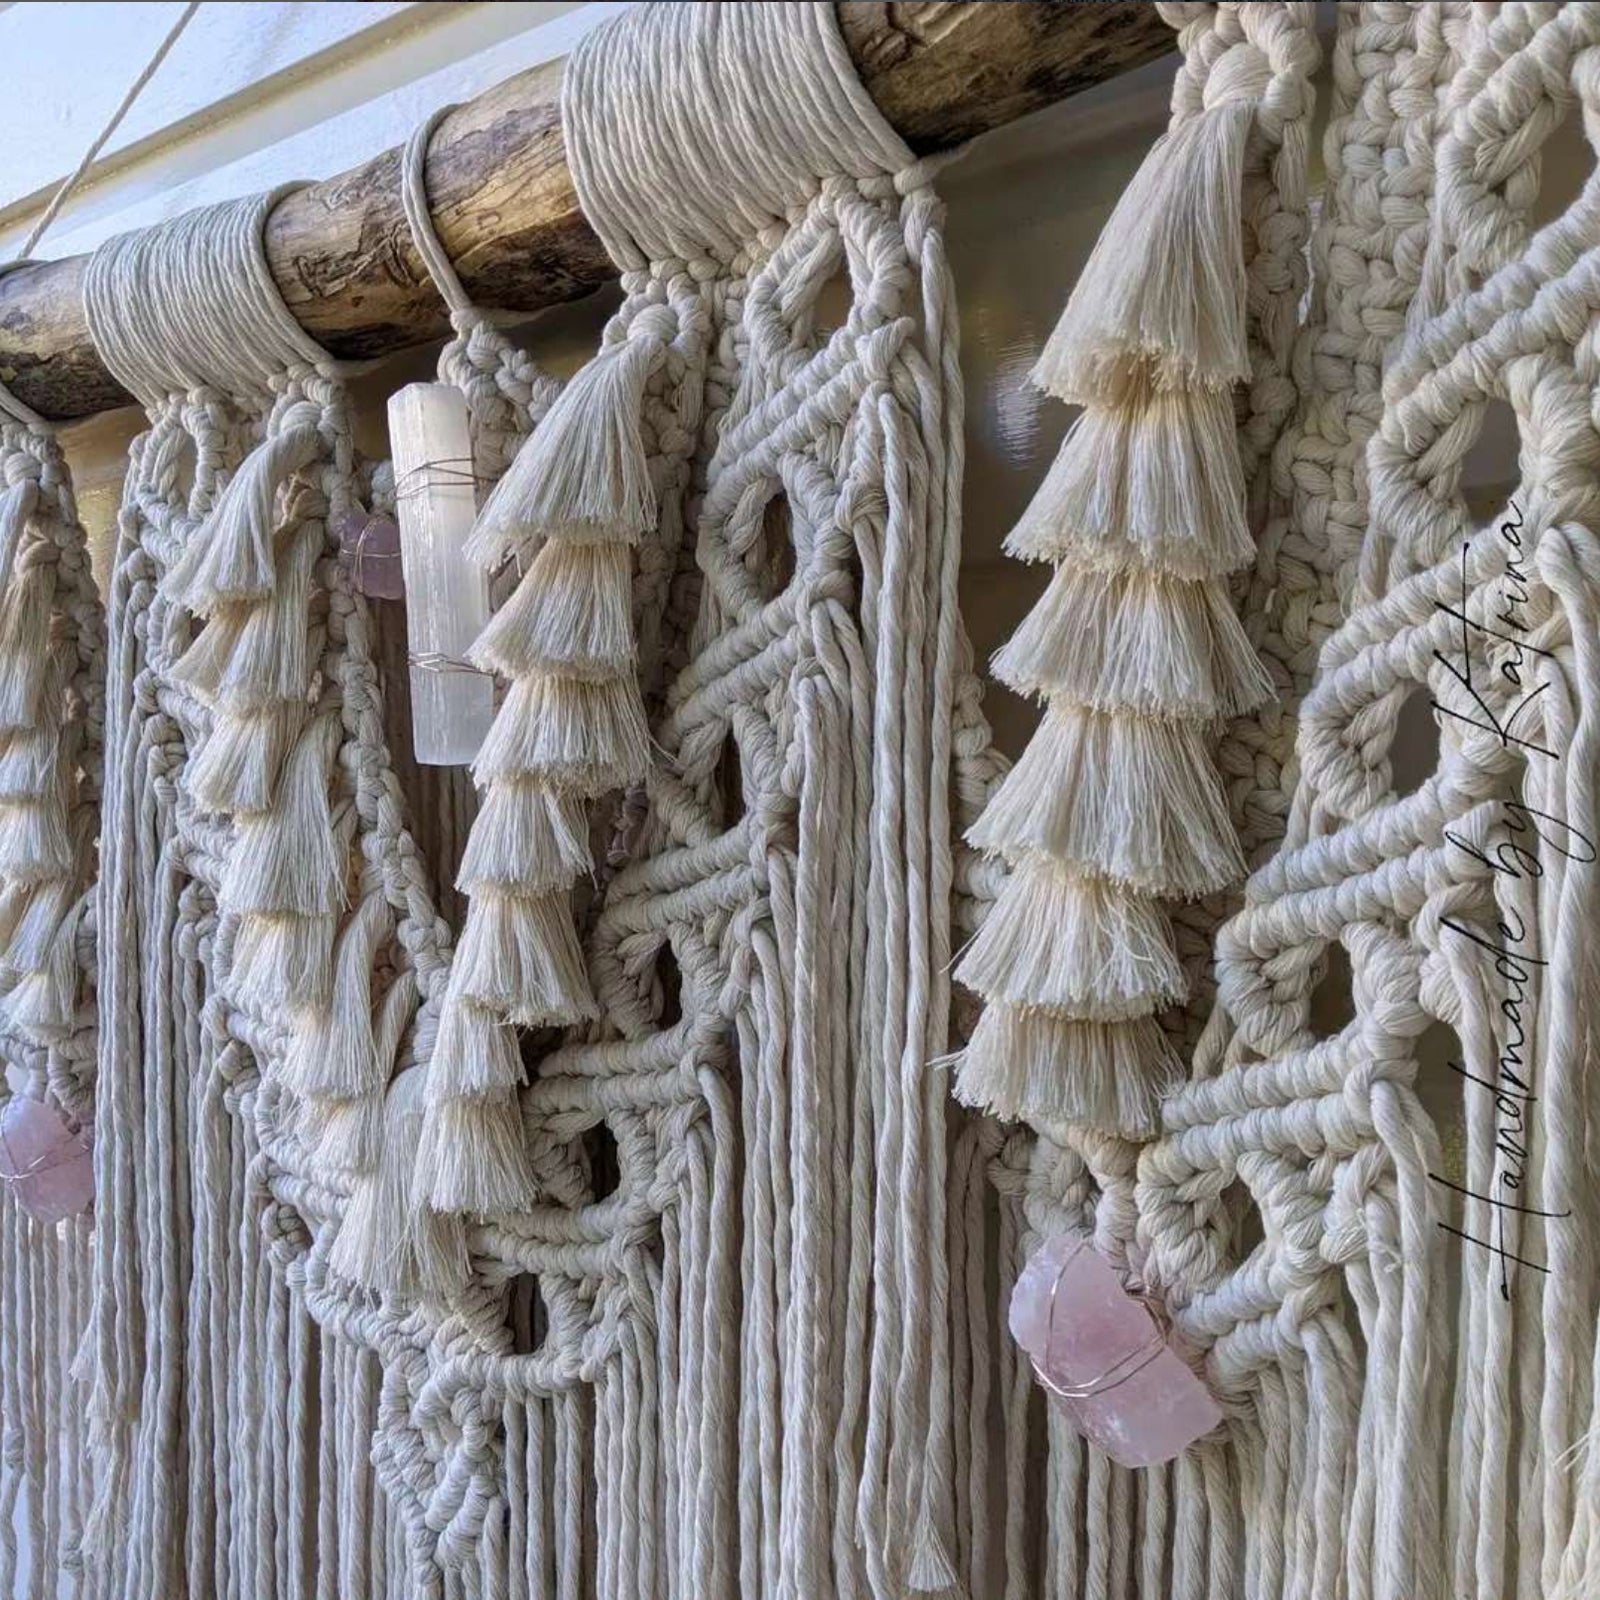 14 DIY Rope Projects That Turn Braided Fibers into Creative Decor